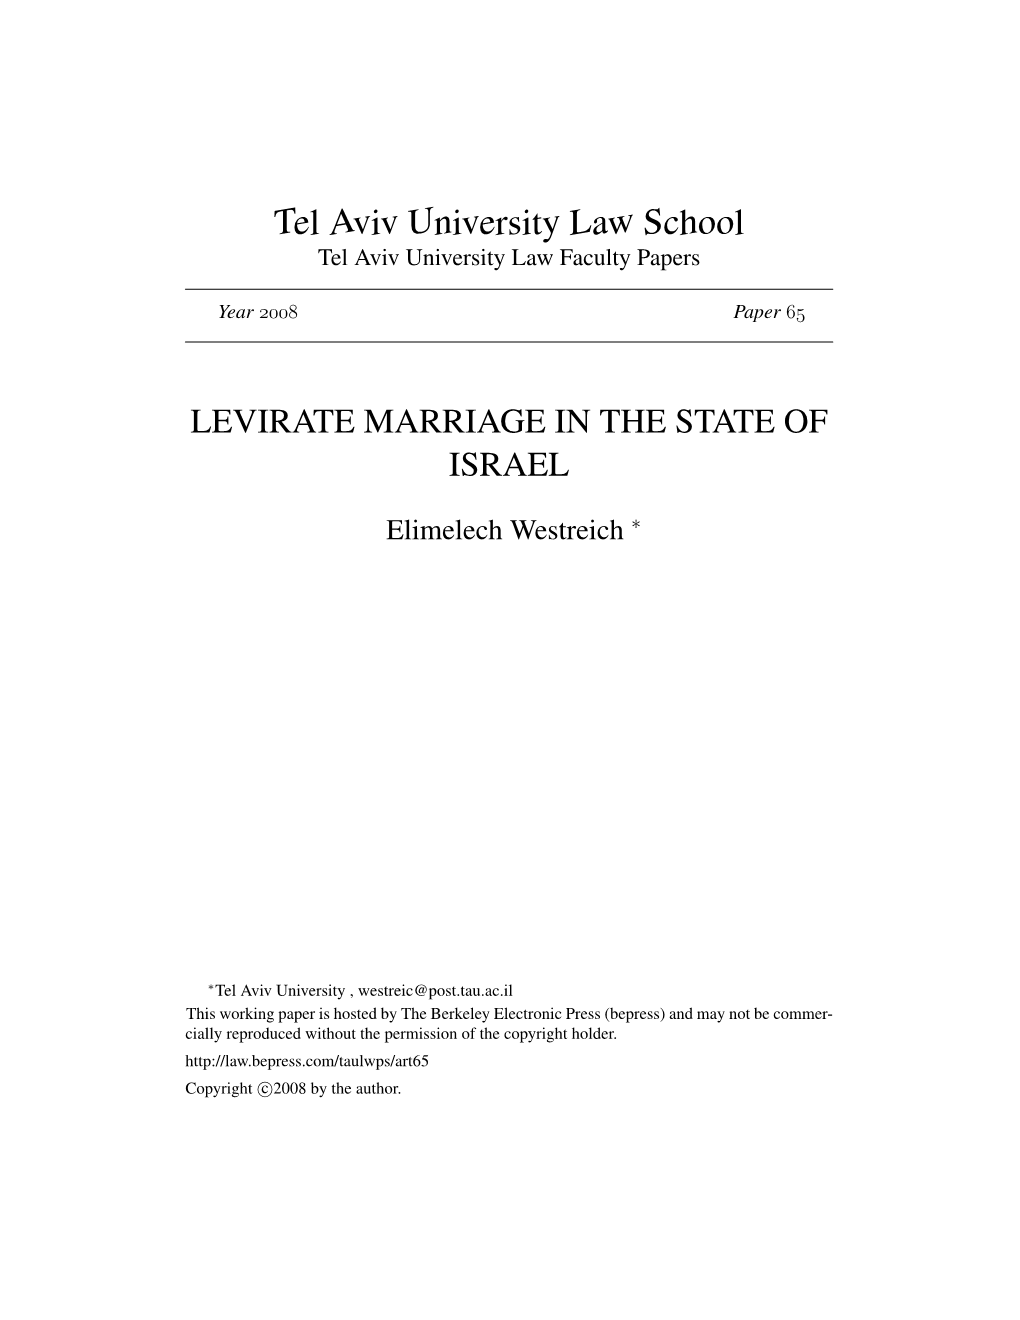 Levirate Marriage in the State of Israel